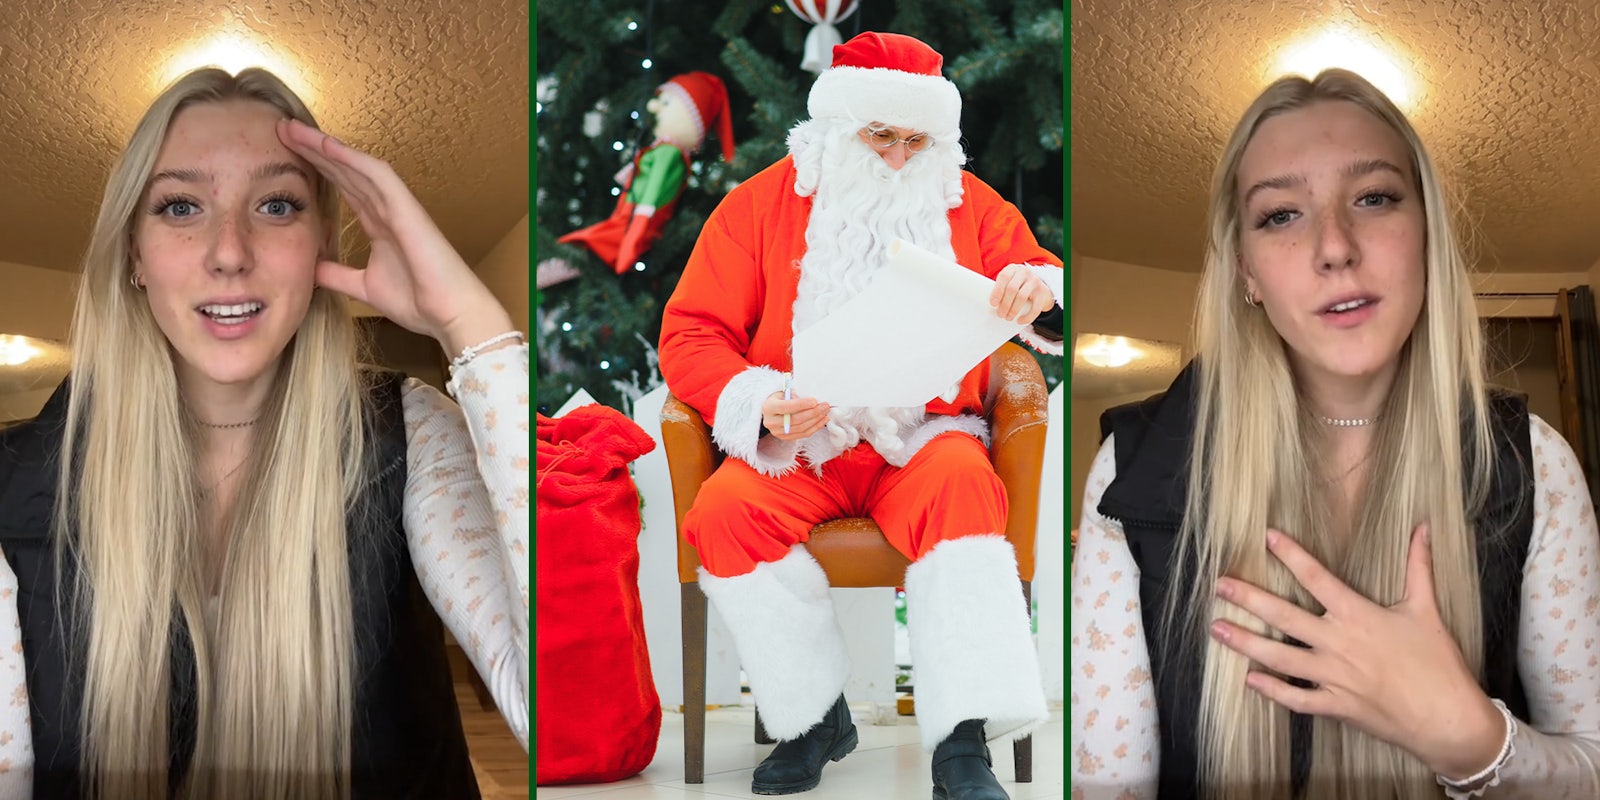 Mall customer calls out ‘creepy old man’ Santa for what he did